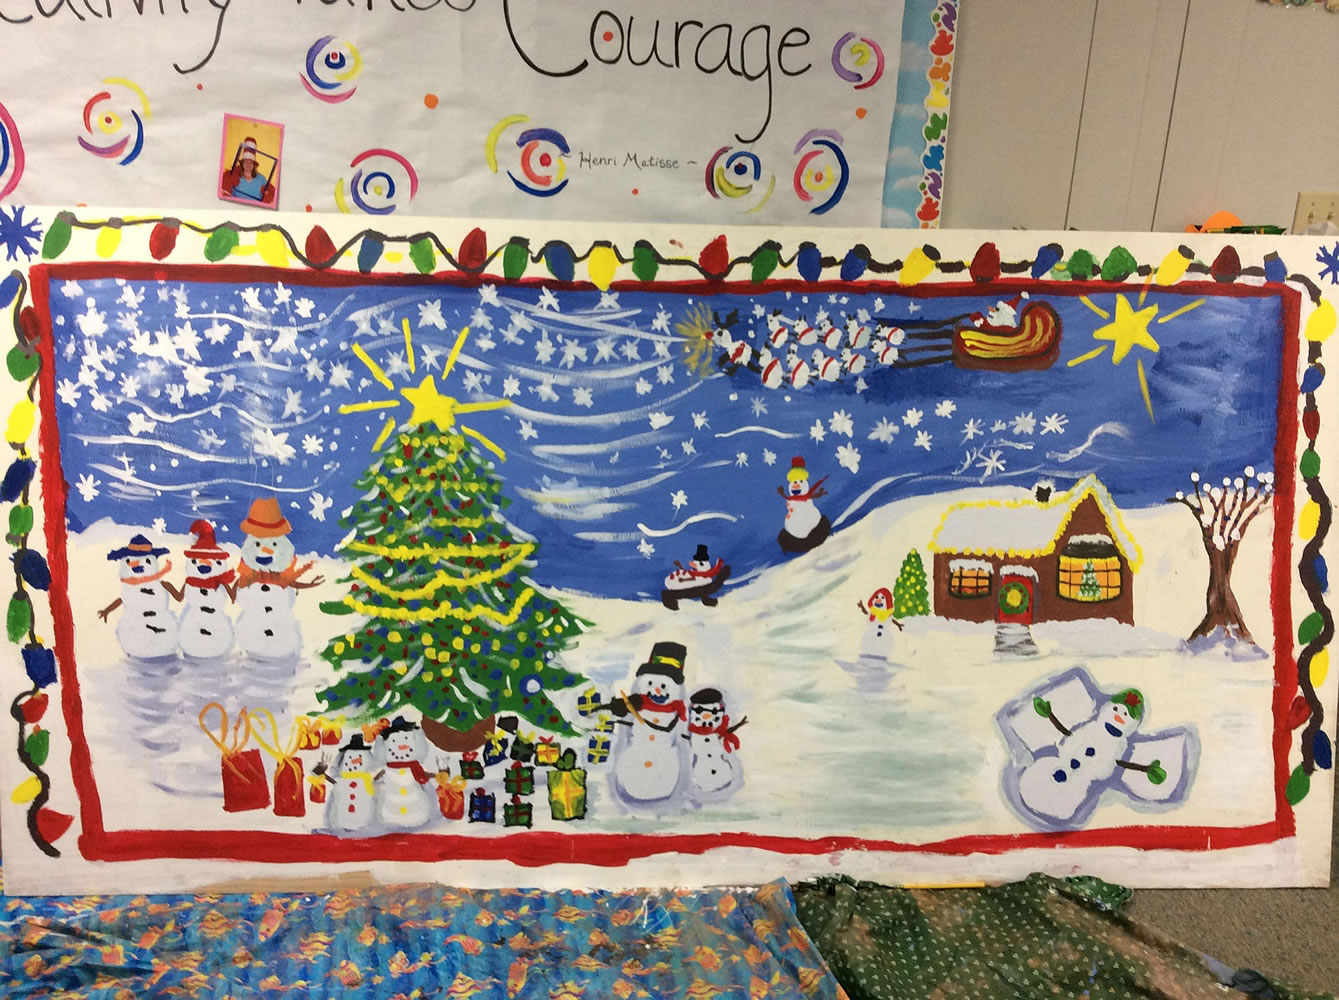 Battle Ground: A Glenwood Heights Primary School third-grade class finished second at this year's Children's Holiday Art Contest at Portland International Raceway's Winter Wonderland light display.